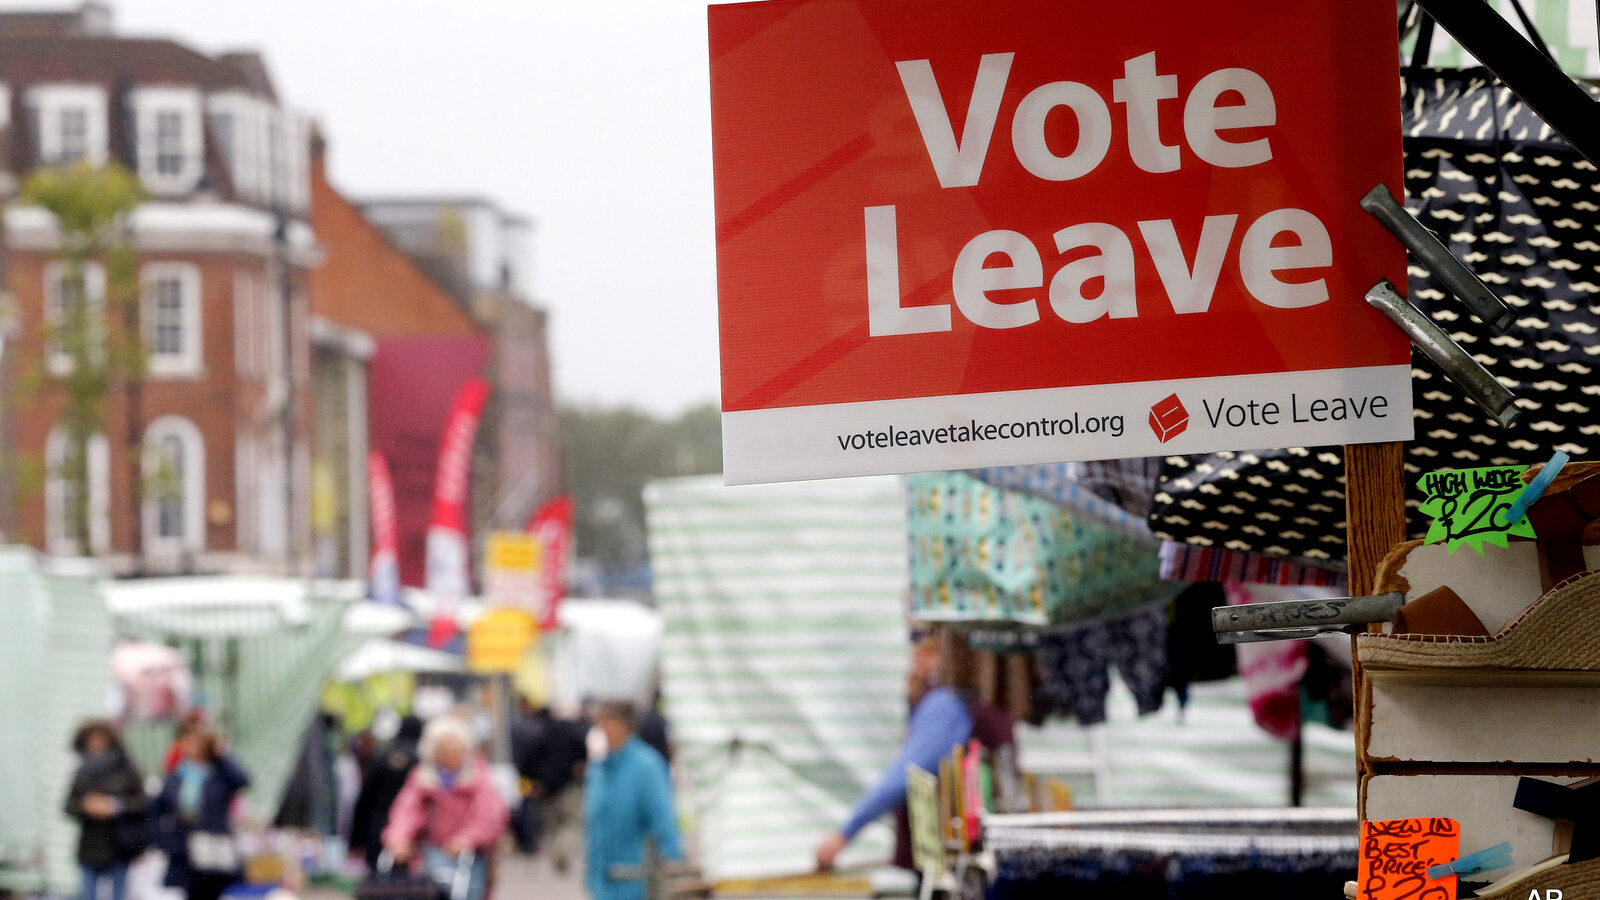 A Vote Leave sign is fixed on a market stall at Havering's Romford street market in London, Wednesday, June 1, 2016.